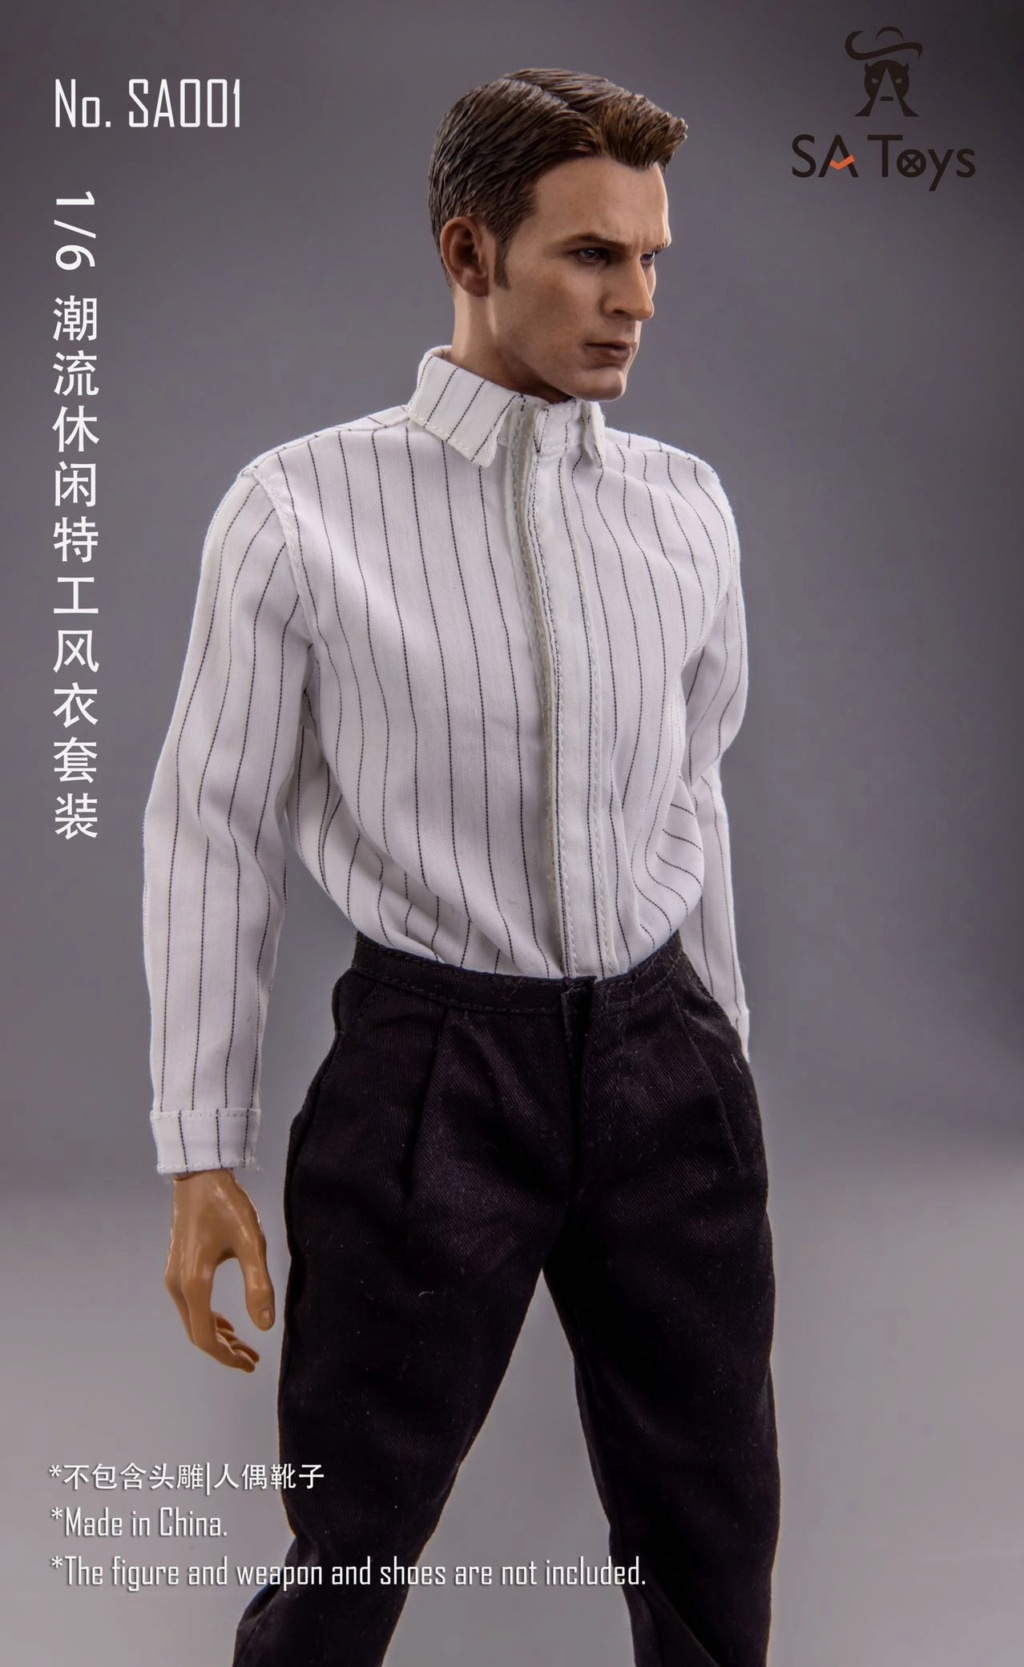 NEW PRODUCT: SA Toys: 1/6 Trend Casual Agent Trench coat set (SA001) 15325611